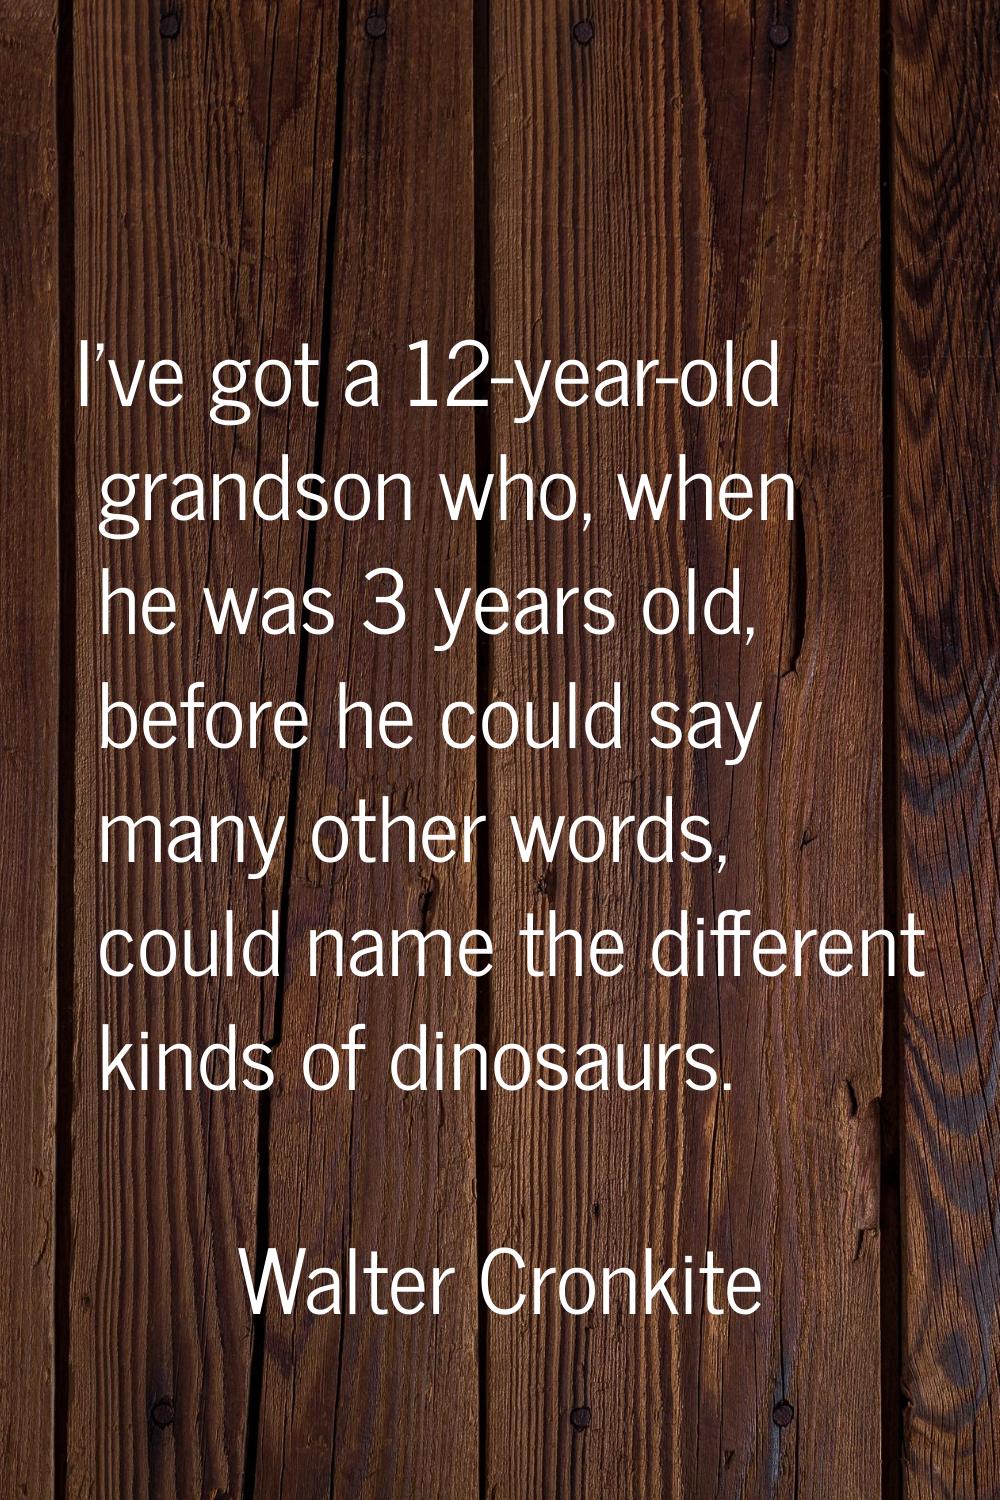 I've got a 12-year-old grandson who, when he was 3 years old, before he could say many other words,